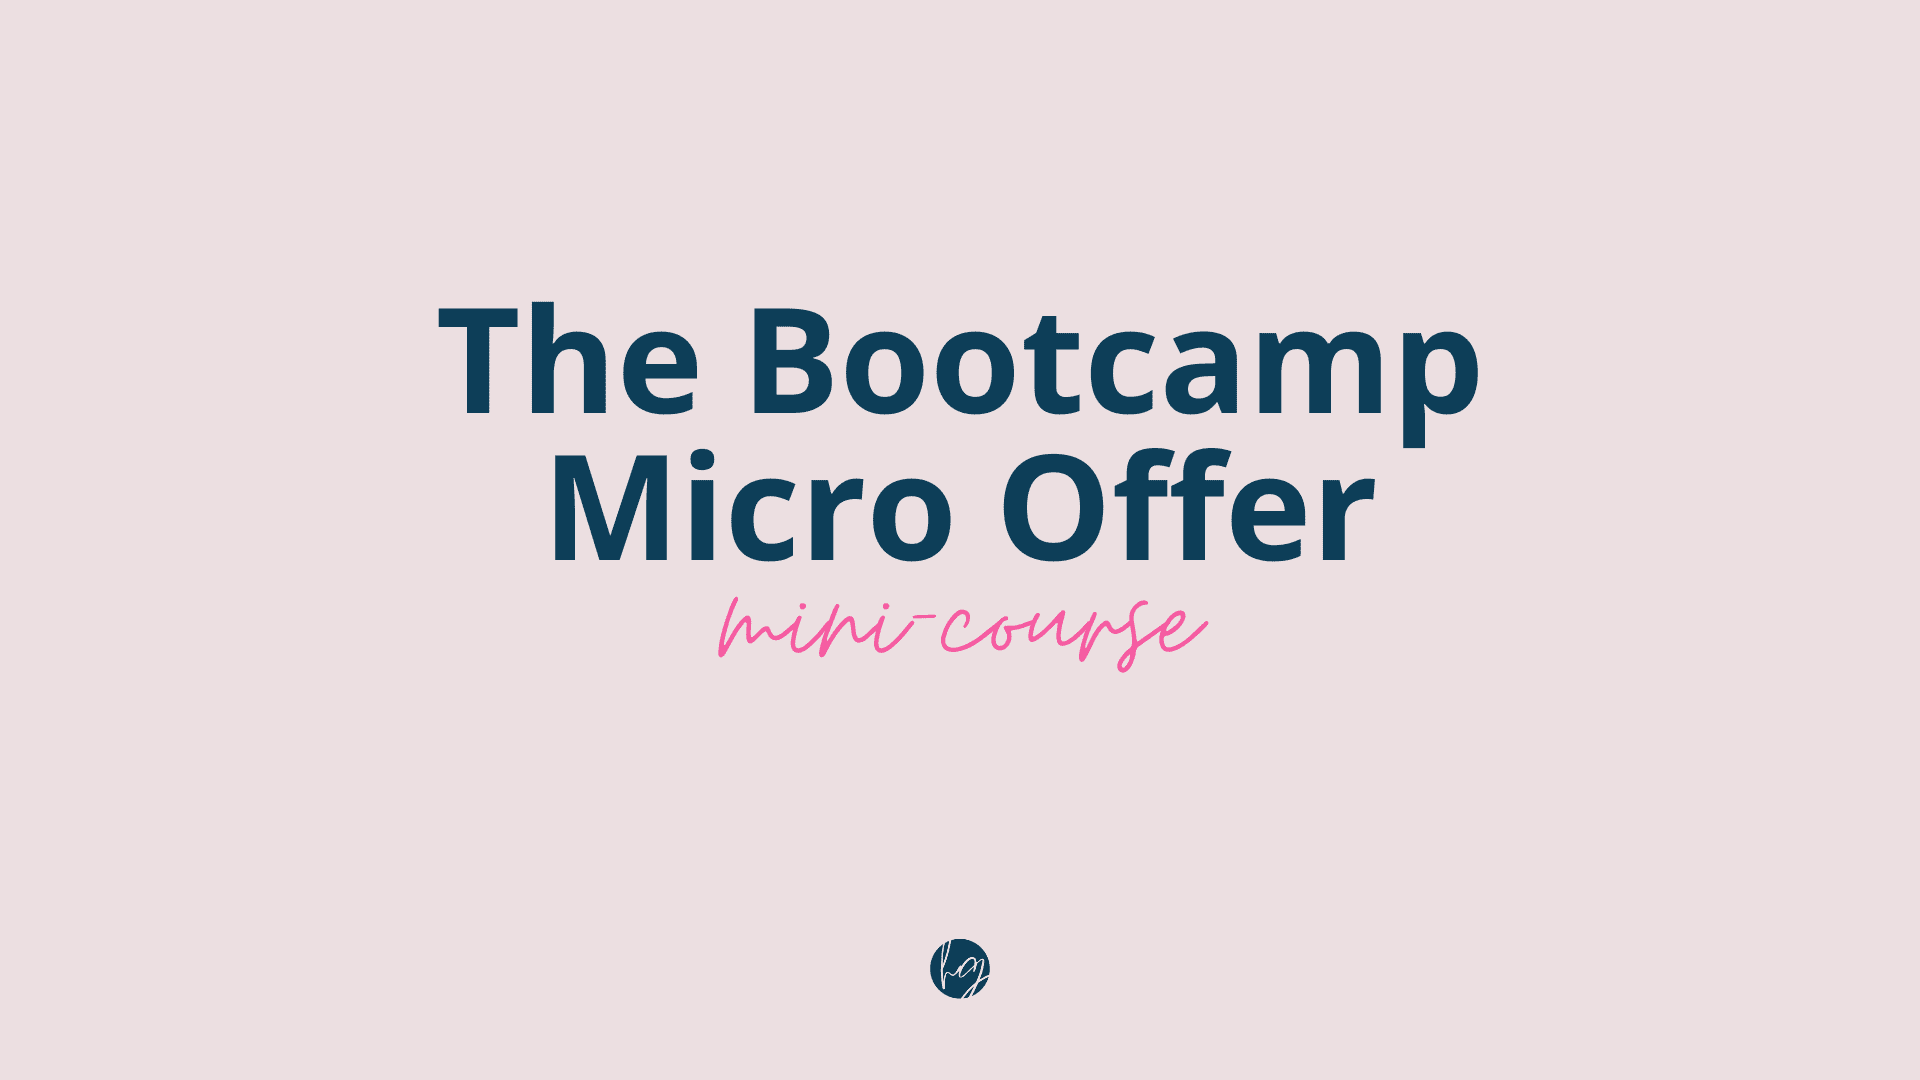 The Bootcamp Micro Offer Mini-Course